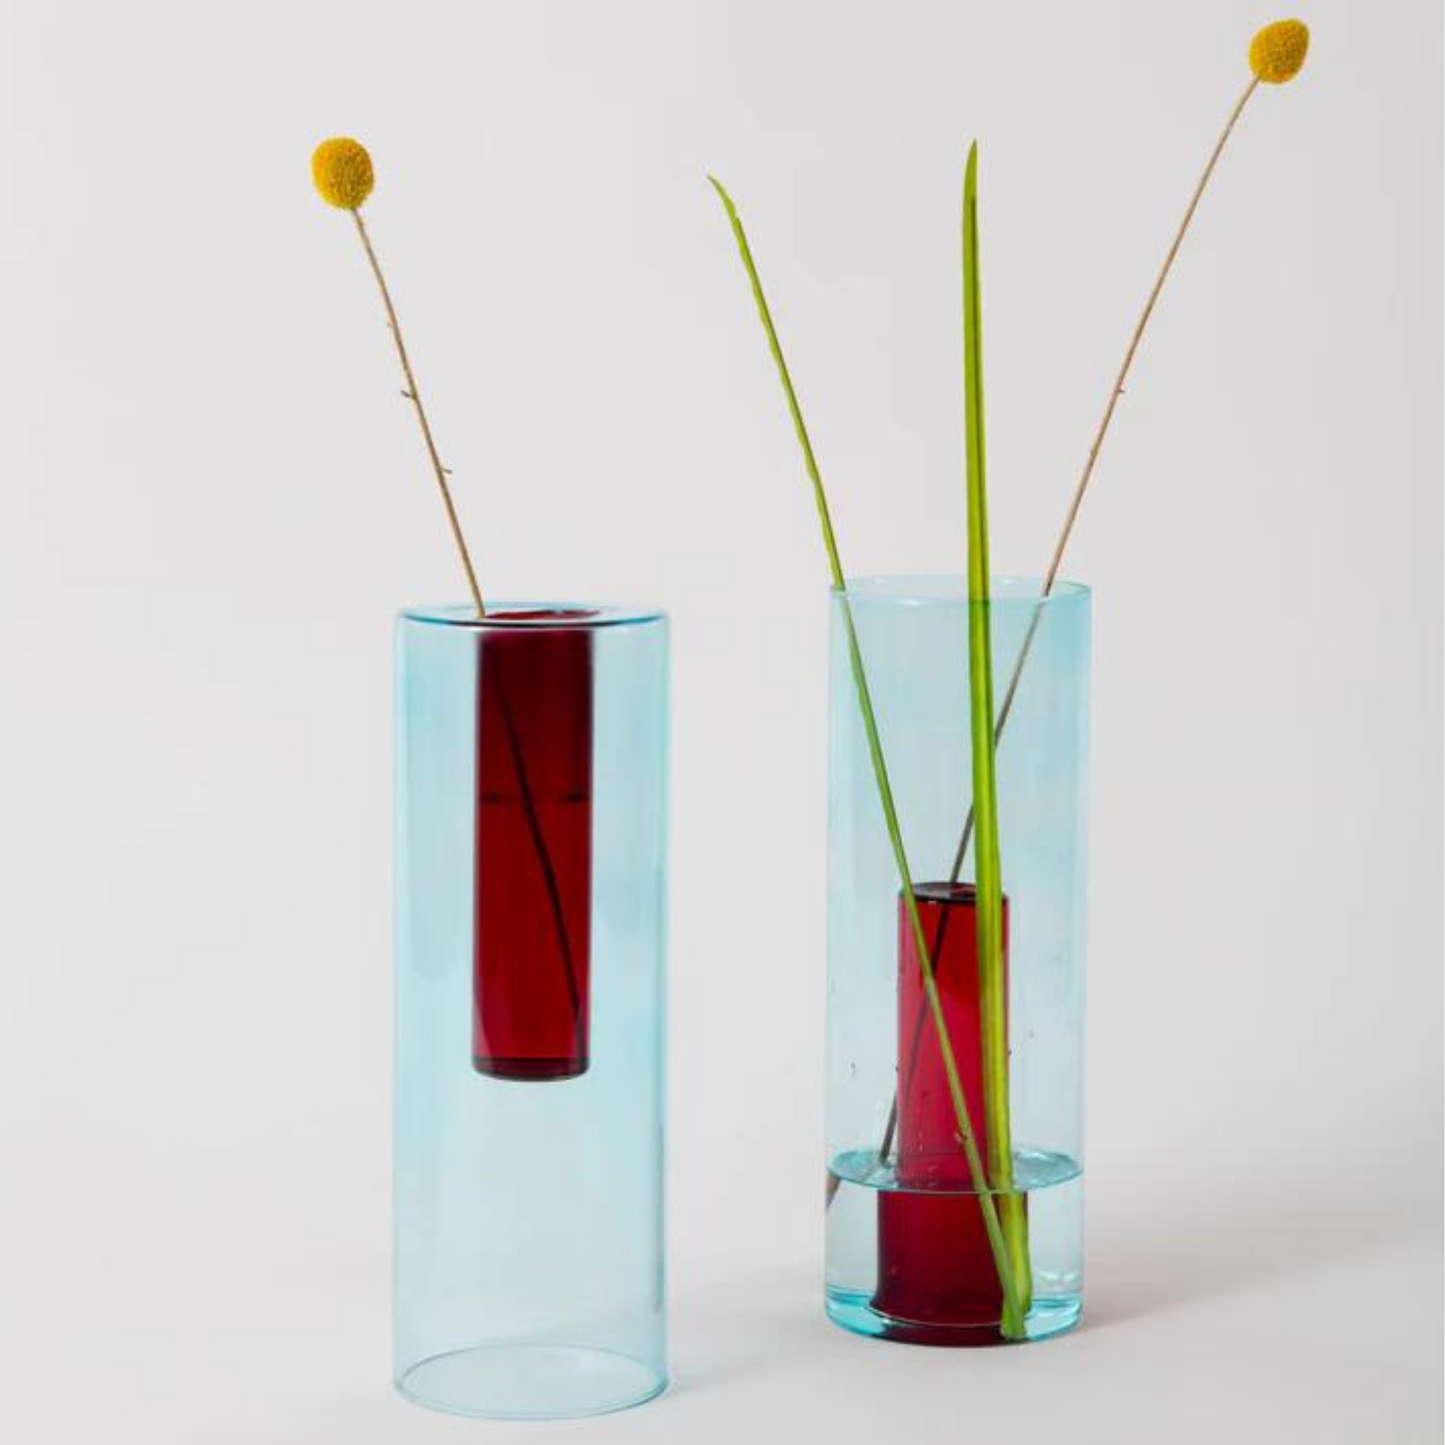 reversible glass blue and red vase with flower stems.